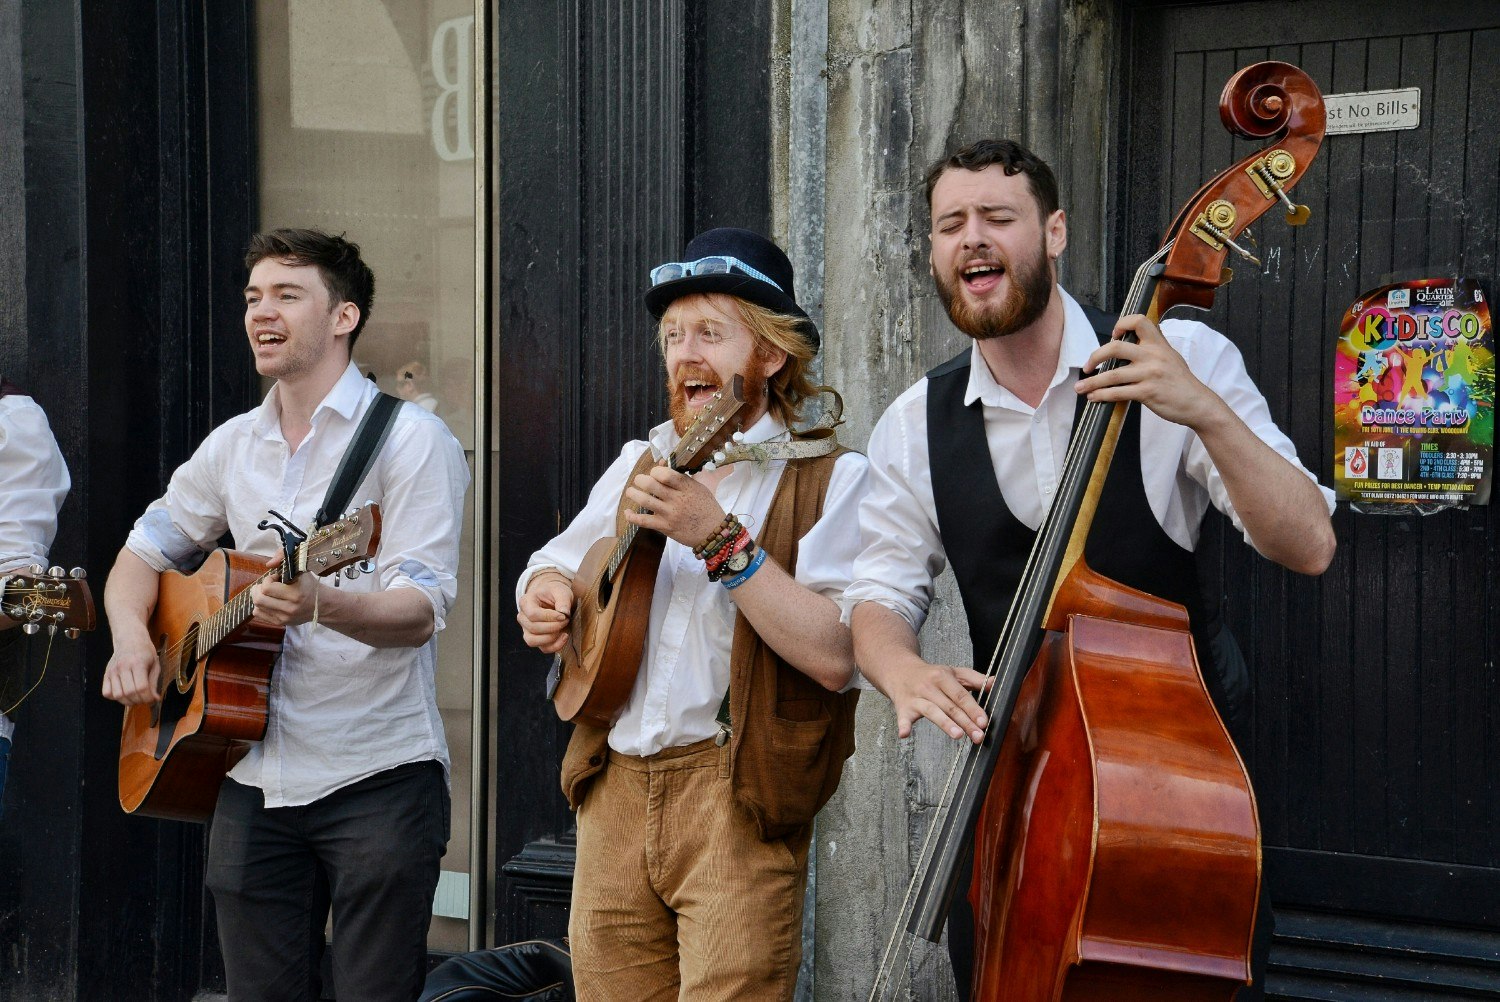 Three buskers performing music on the streets of Galway.